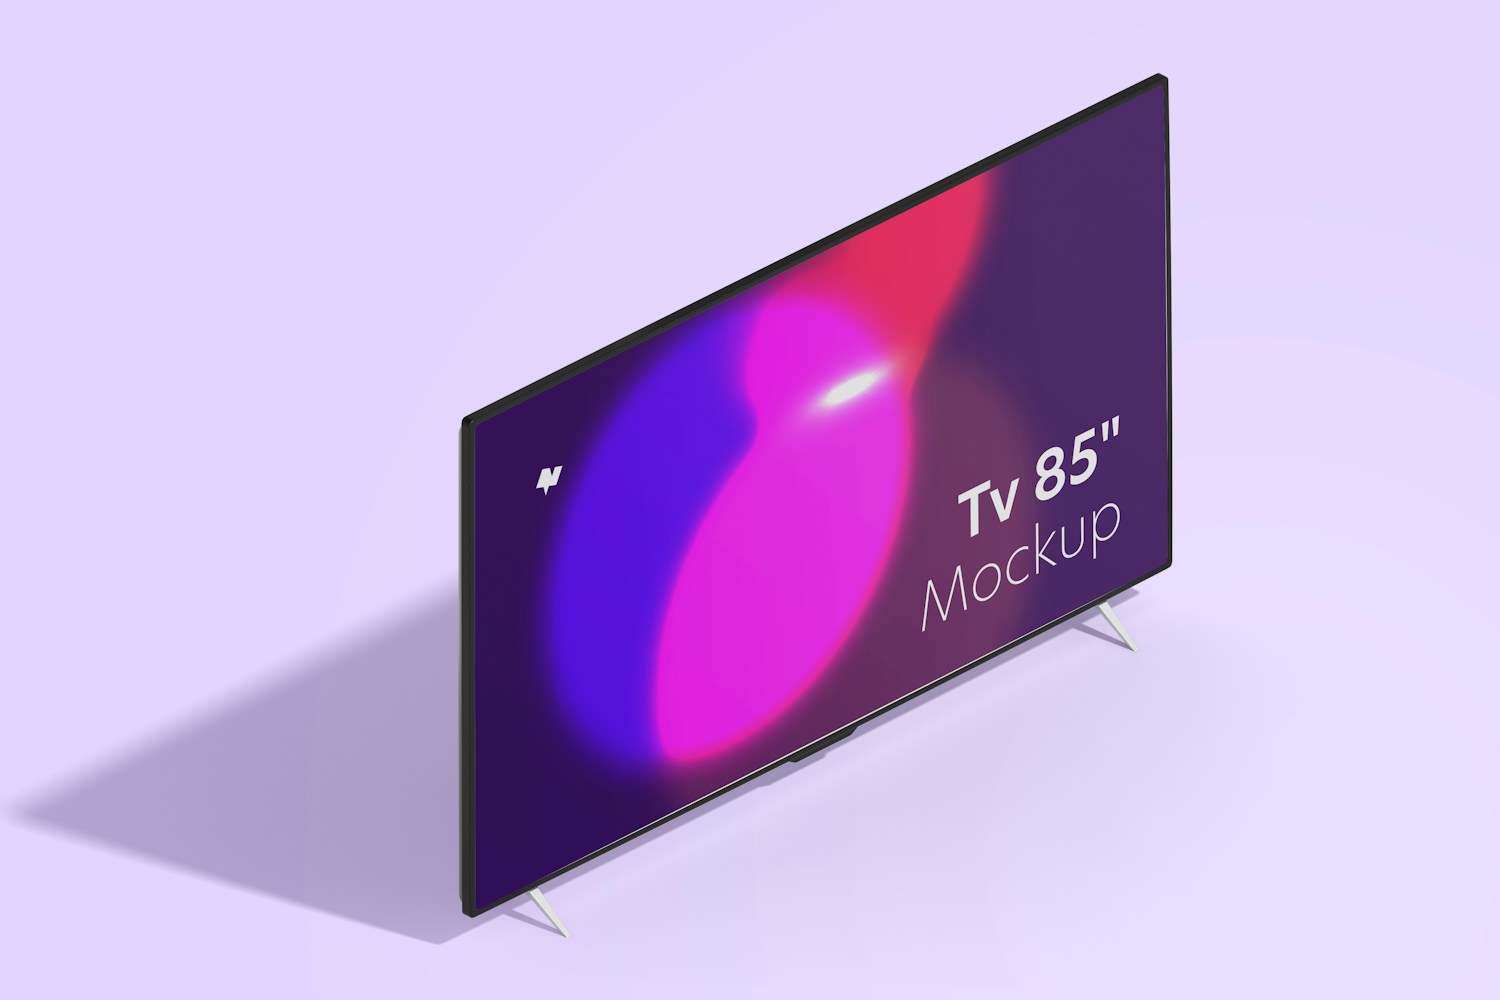 TV 85" Mockup, Right View